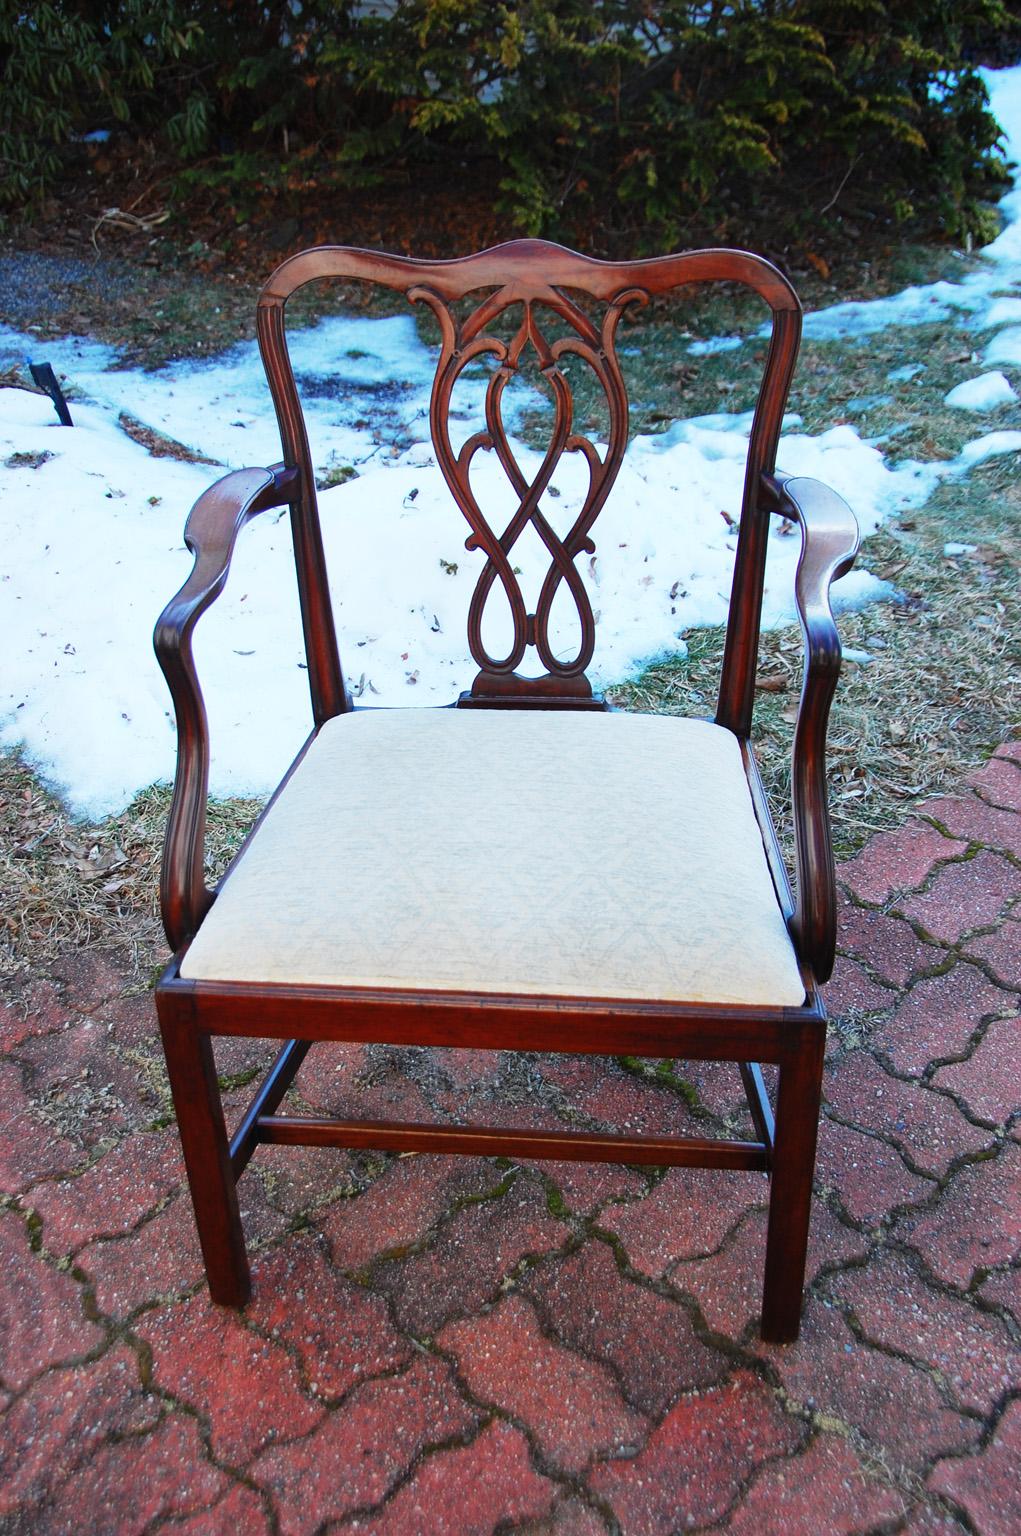 English Georgian mahogany Chippendale armchair with carved shaped central splat, H stretcher, slip seat (fabric is not new but is usable), square legs. The central splat is a graceful interlocking of curving carved elements. Circa 1800.